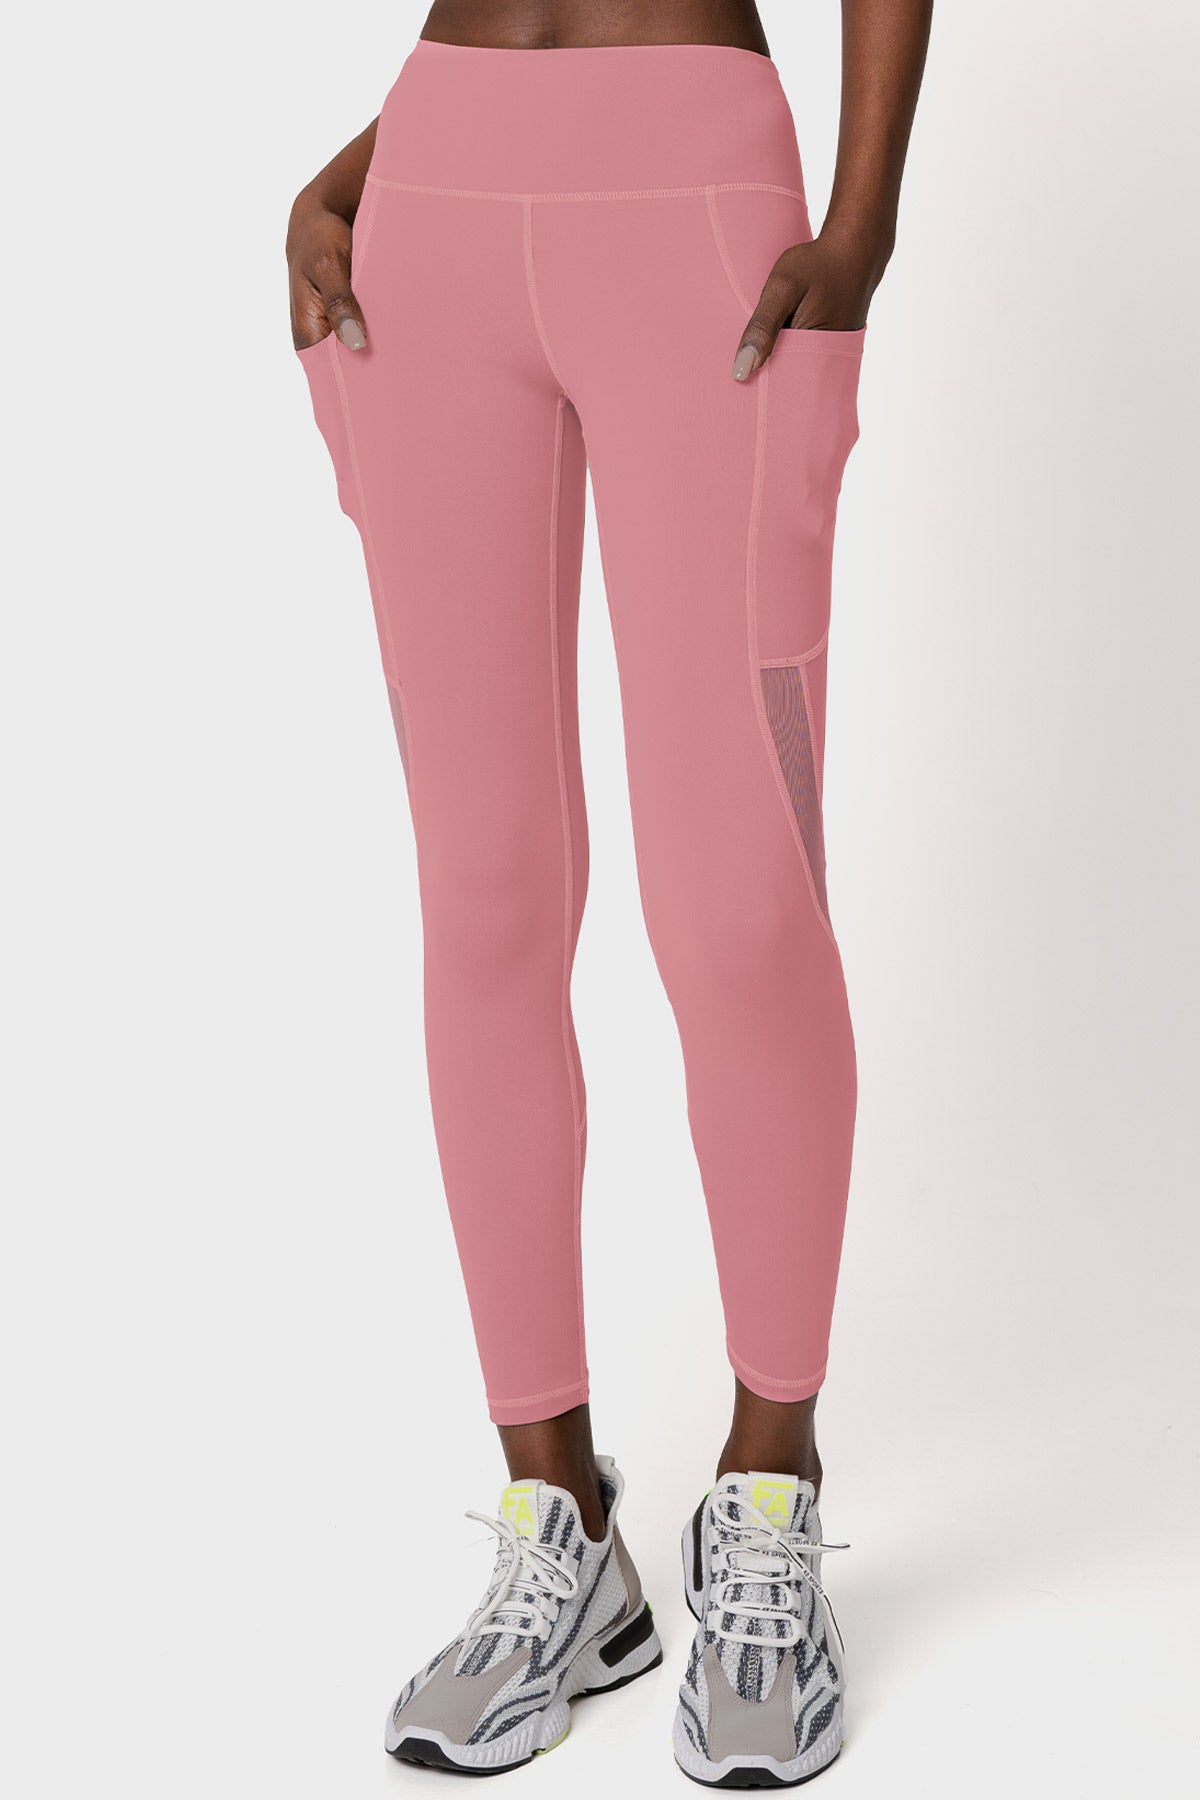 Image of SALE! Dusty Pink Cassi Workout Yoga Leggings with Mesh & Pockets - Women